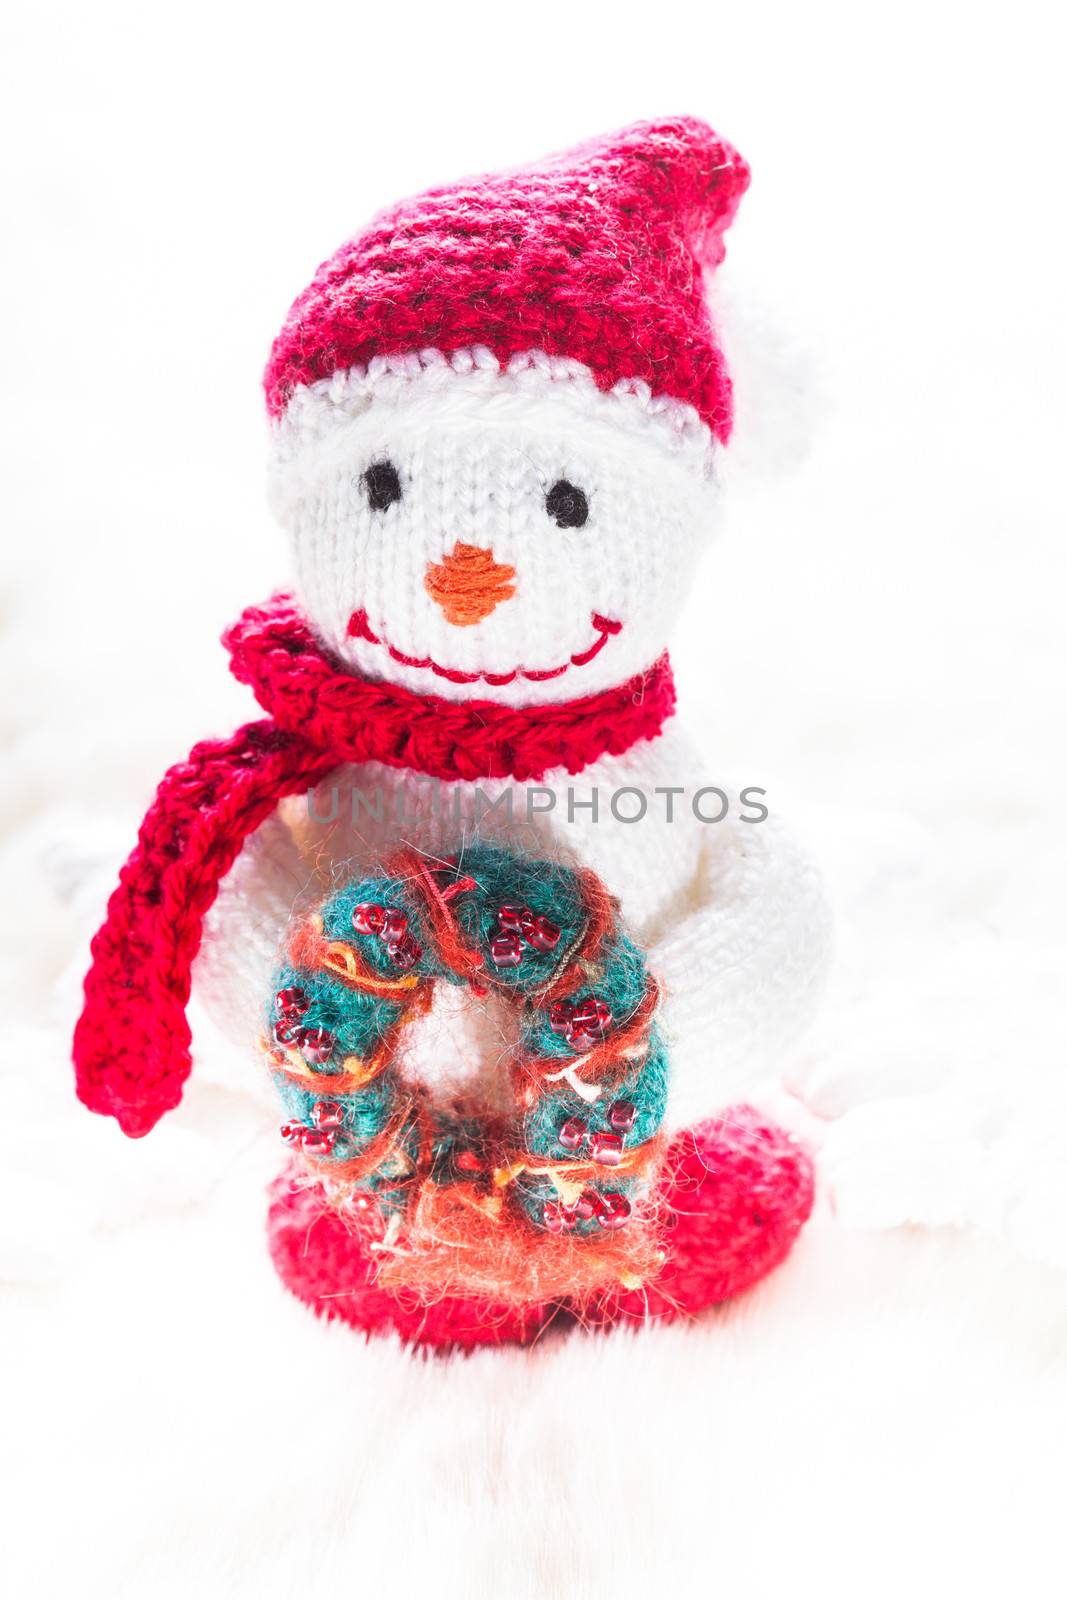 Knitted snowman by oksix